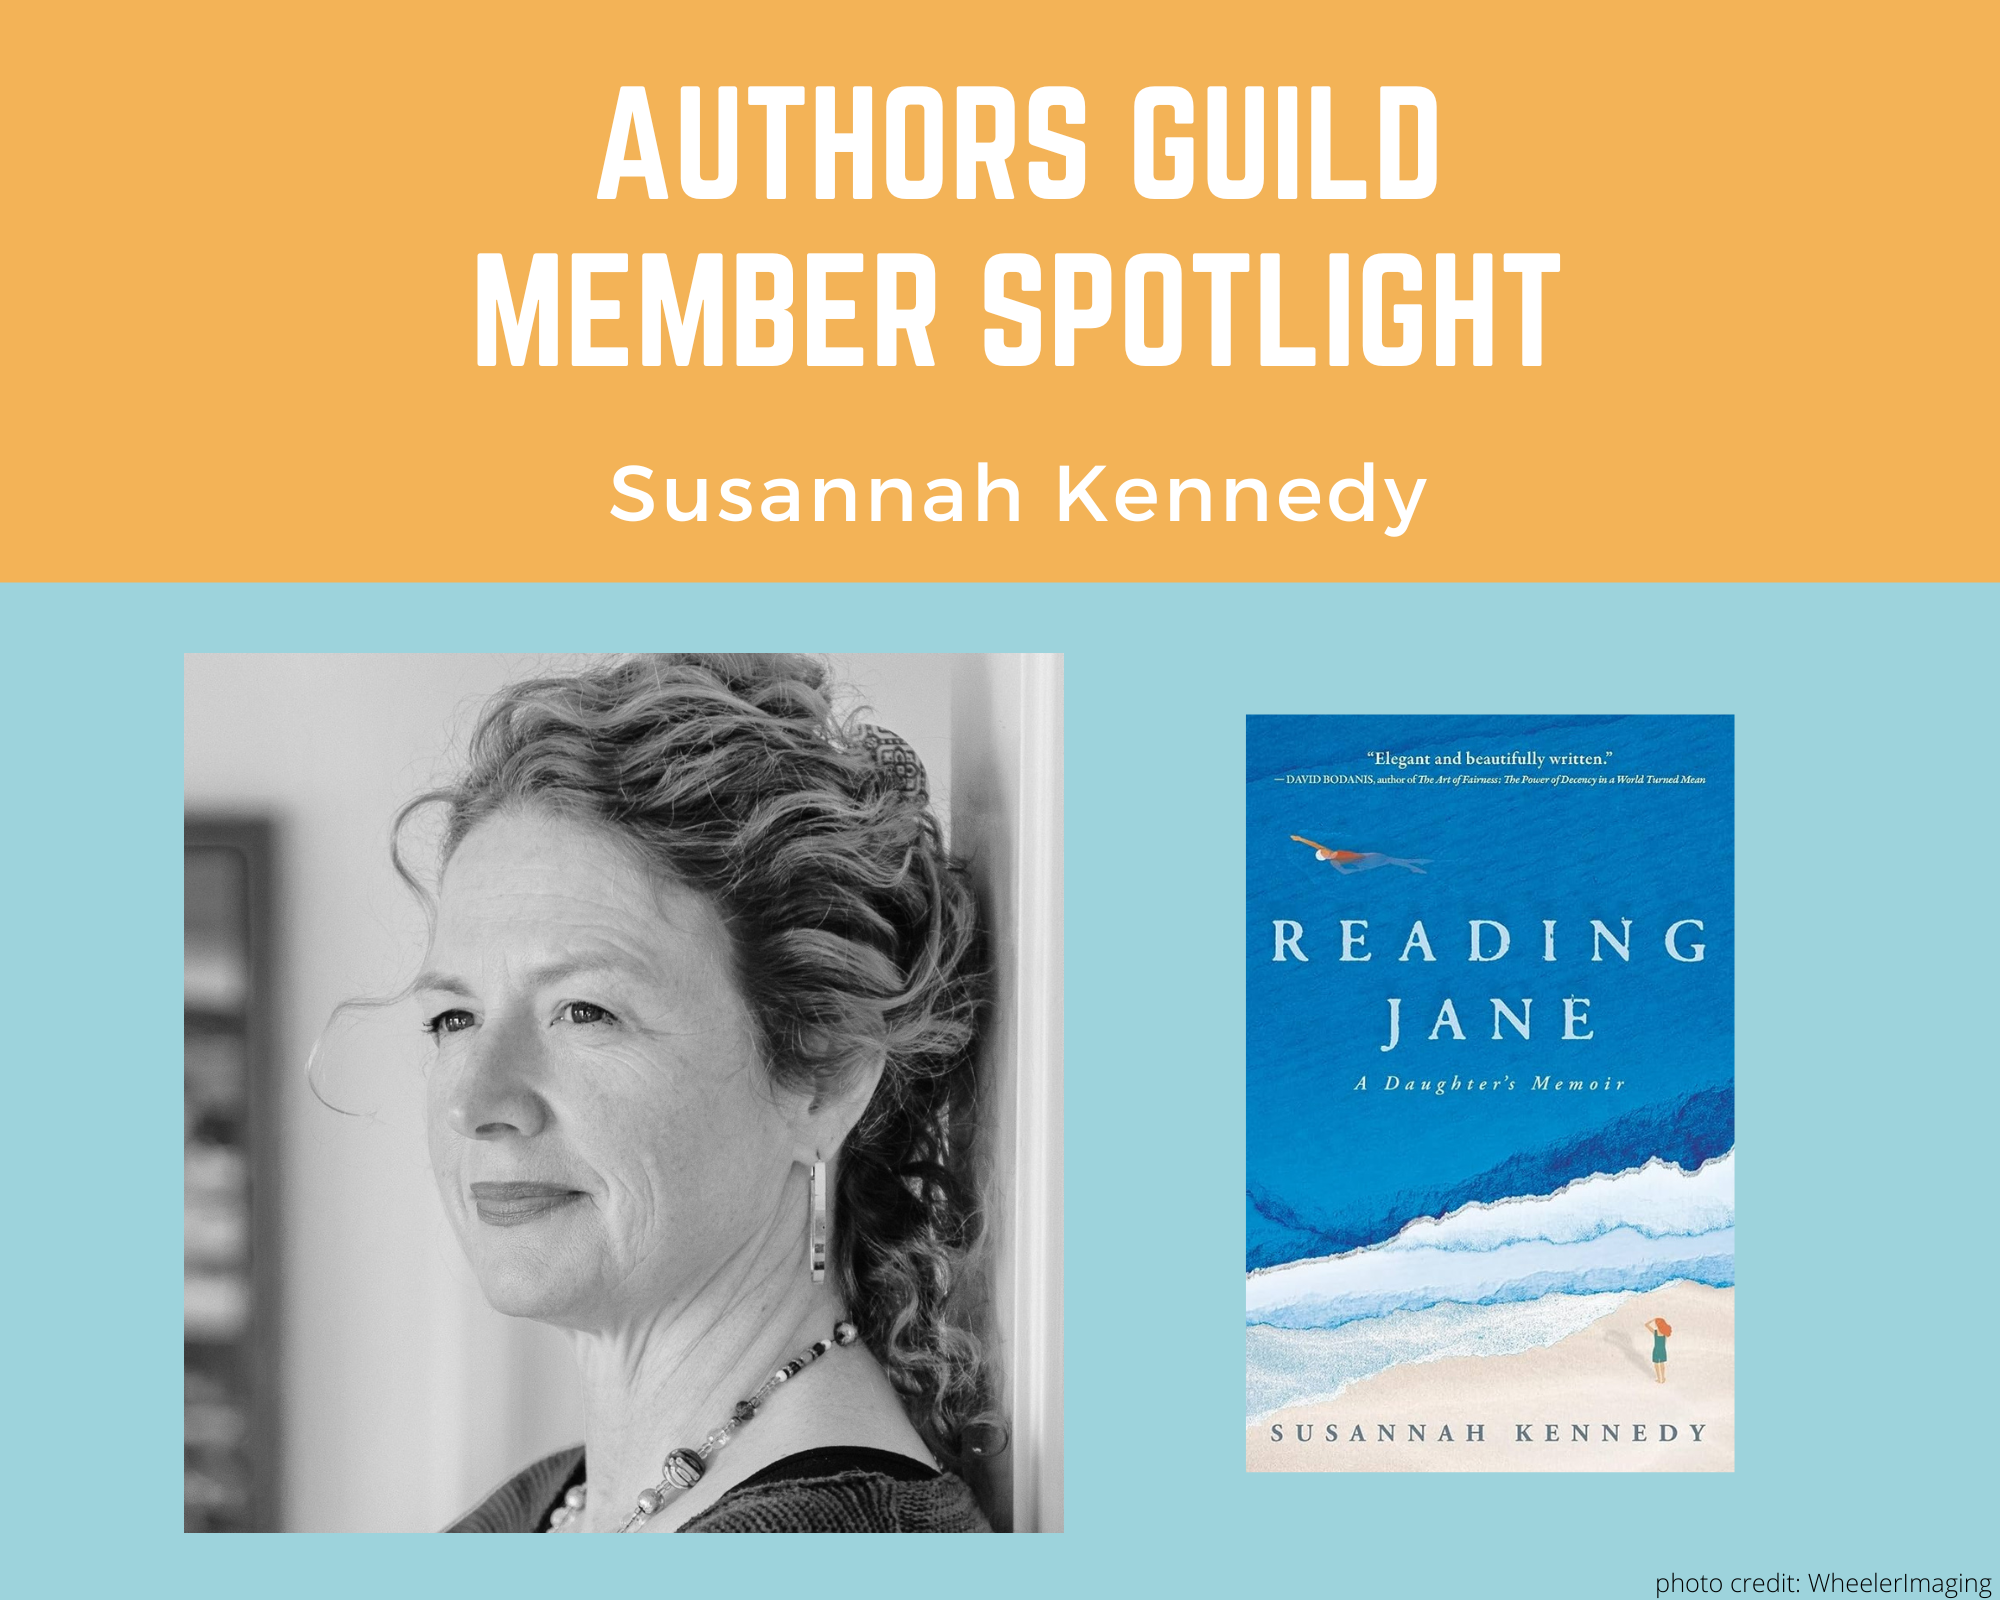 author Susannah Kennedy and an image of her book Reading Jane